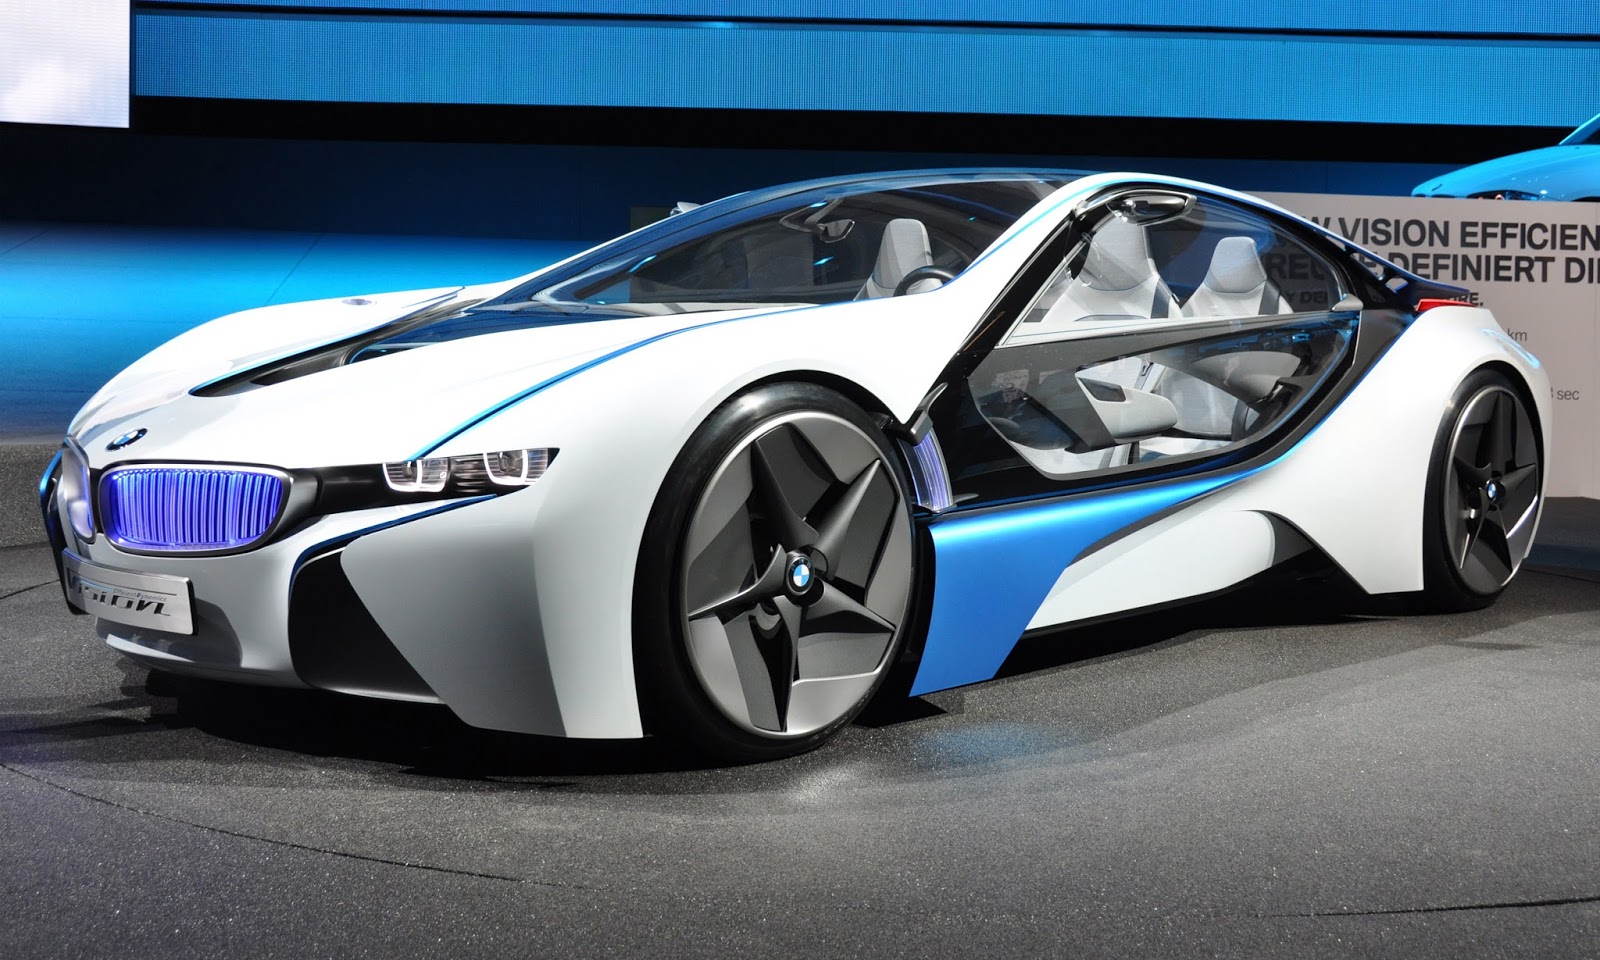 BMW i8 HD wallpapers | HD Wallpapers (High Definition) | Free Background